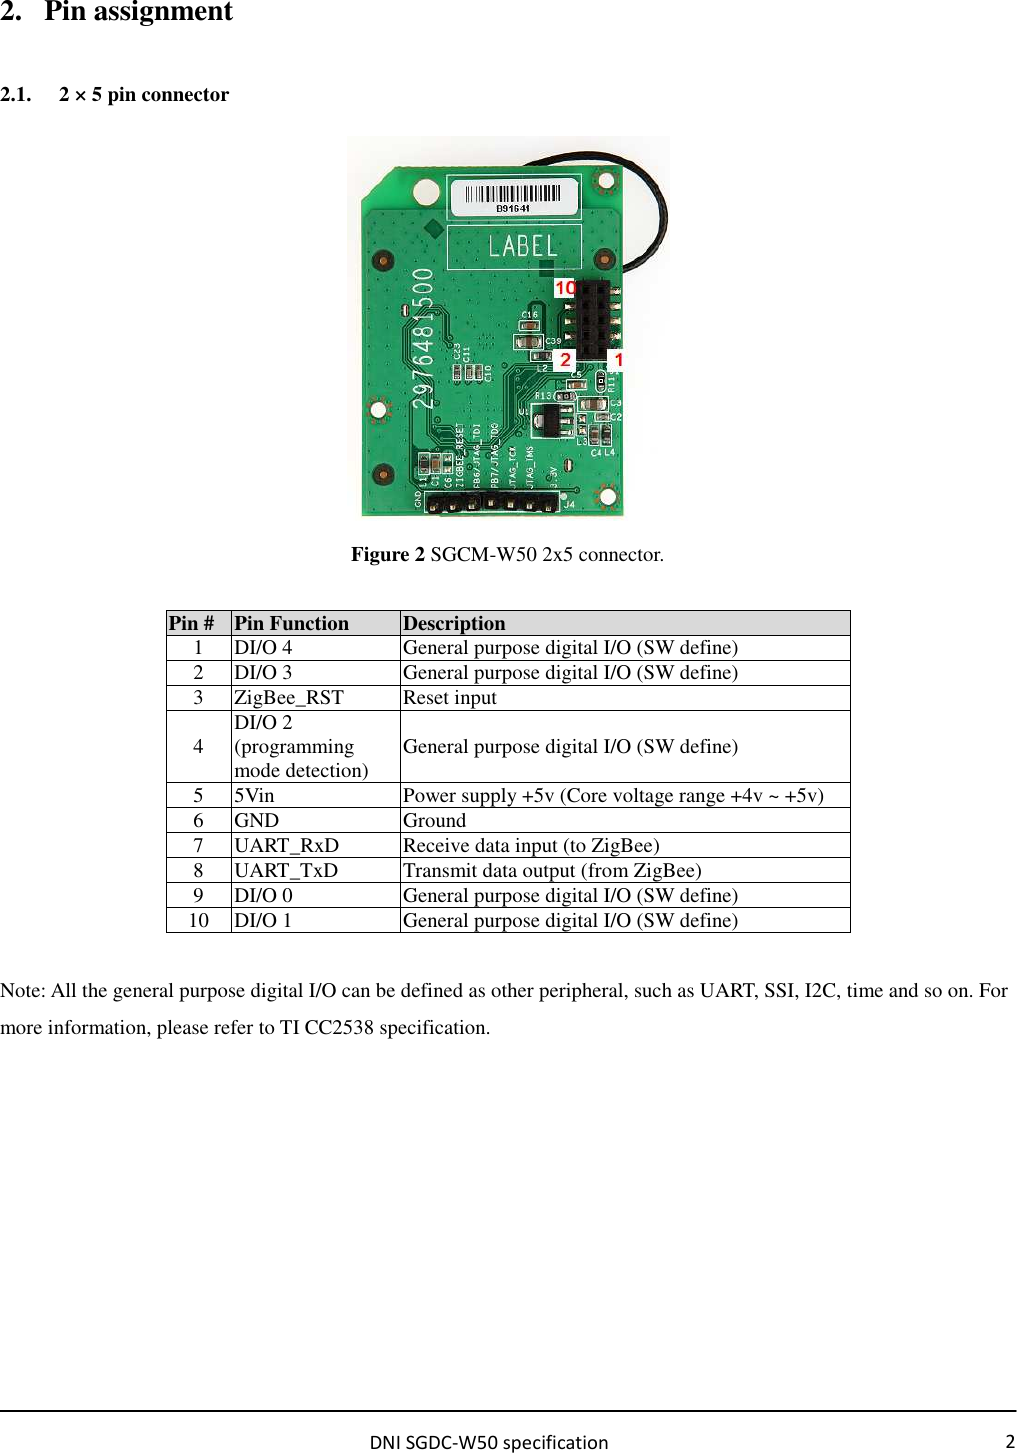                                                         DNI SGDC-W50 specification 2 2. Pin assignment 2.1. 2 × 5 pin connector  Figure 2 SGCM-W50 2x5 connector.  Pin # Pin Function  Description 1  DI/O 4  General purpose digital I/O (SW define) 2  DI/O 3  General purpose digital I/O (SW define) 3  ZigBee_RST  Reset input 4  DI/O 2 (programming mode detection)  General purpose digital I/O (SW define) 5  5Vin  Power supply +5v (Core voltage range +4v ~ +5v) 6  GND  Ground 7  UART_RxD  Receive data input (to ZigBee) 8  UART_TxD  Transmit data output (from ZigBee) 9  DI/O 0  General purpose digital I/O (SW define) 10  DI/O 1  General purpose digital I/O (SW define)  Note: All the general purpose digital I/O can be defined as other peripheral, such as UART, SSI, I2C, time and so on. For more information, please refer to TI CC2538 specification.        